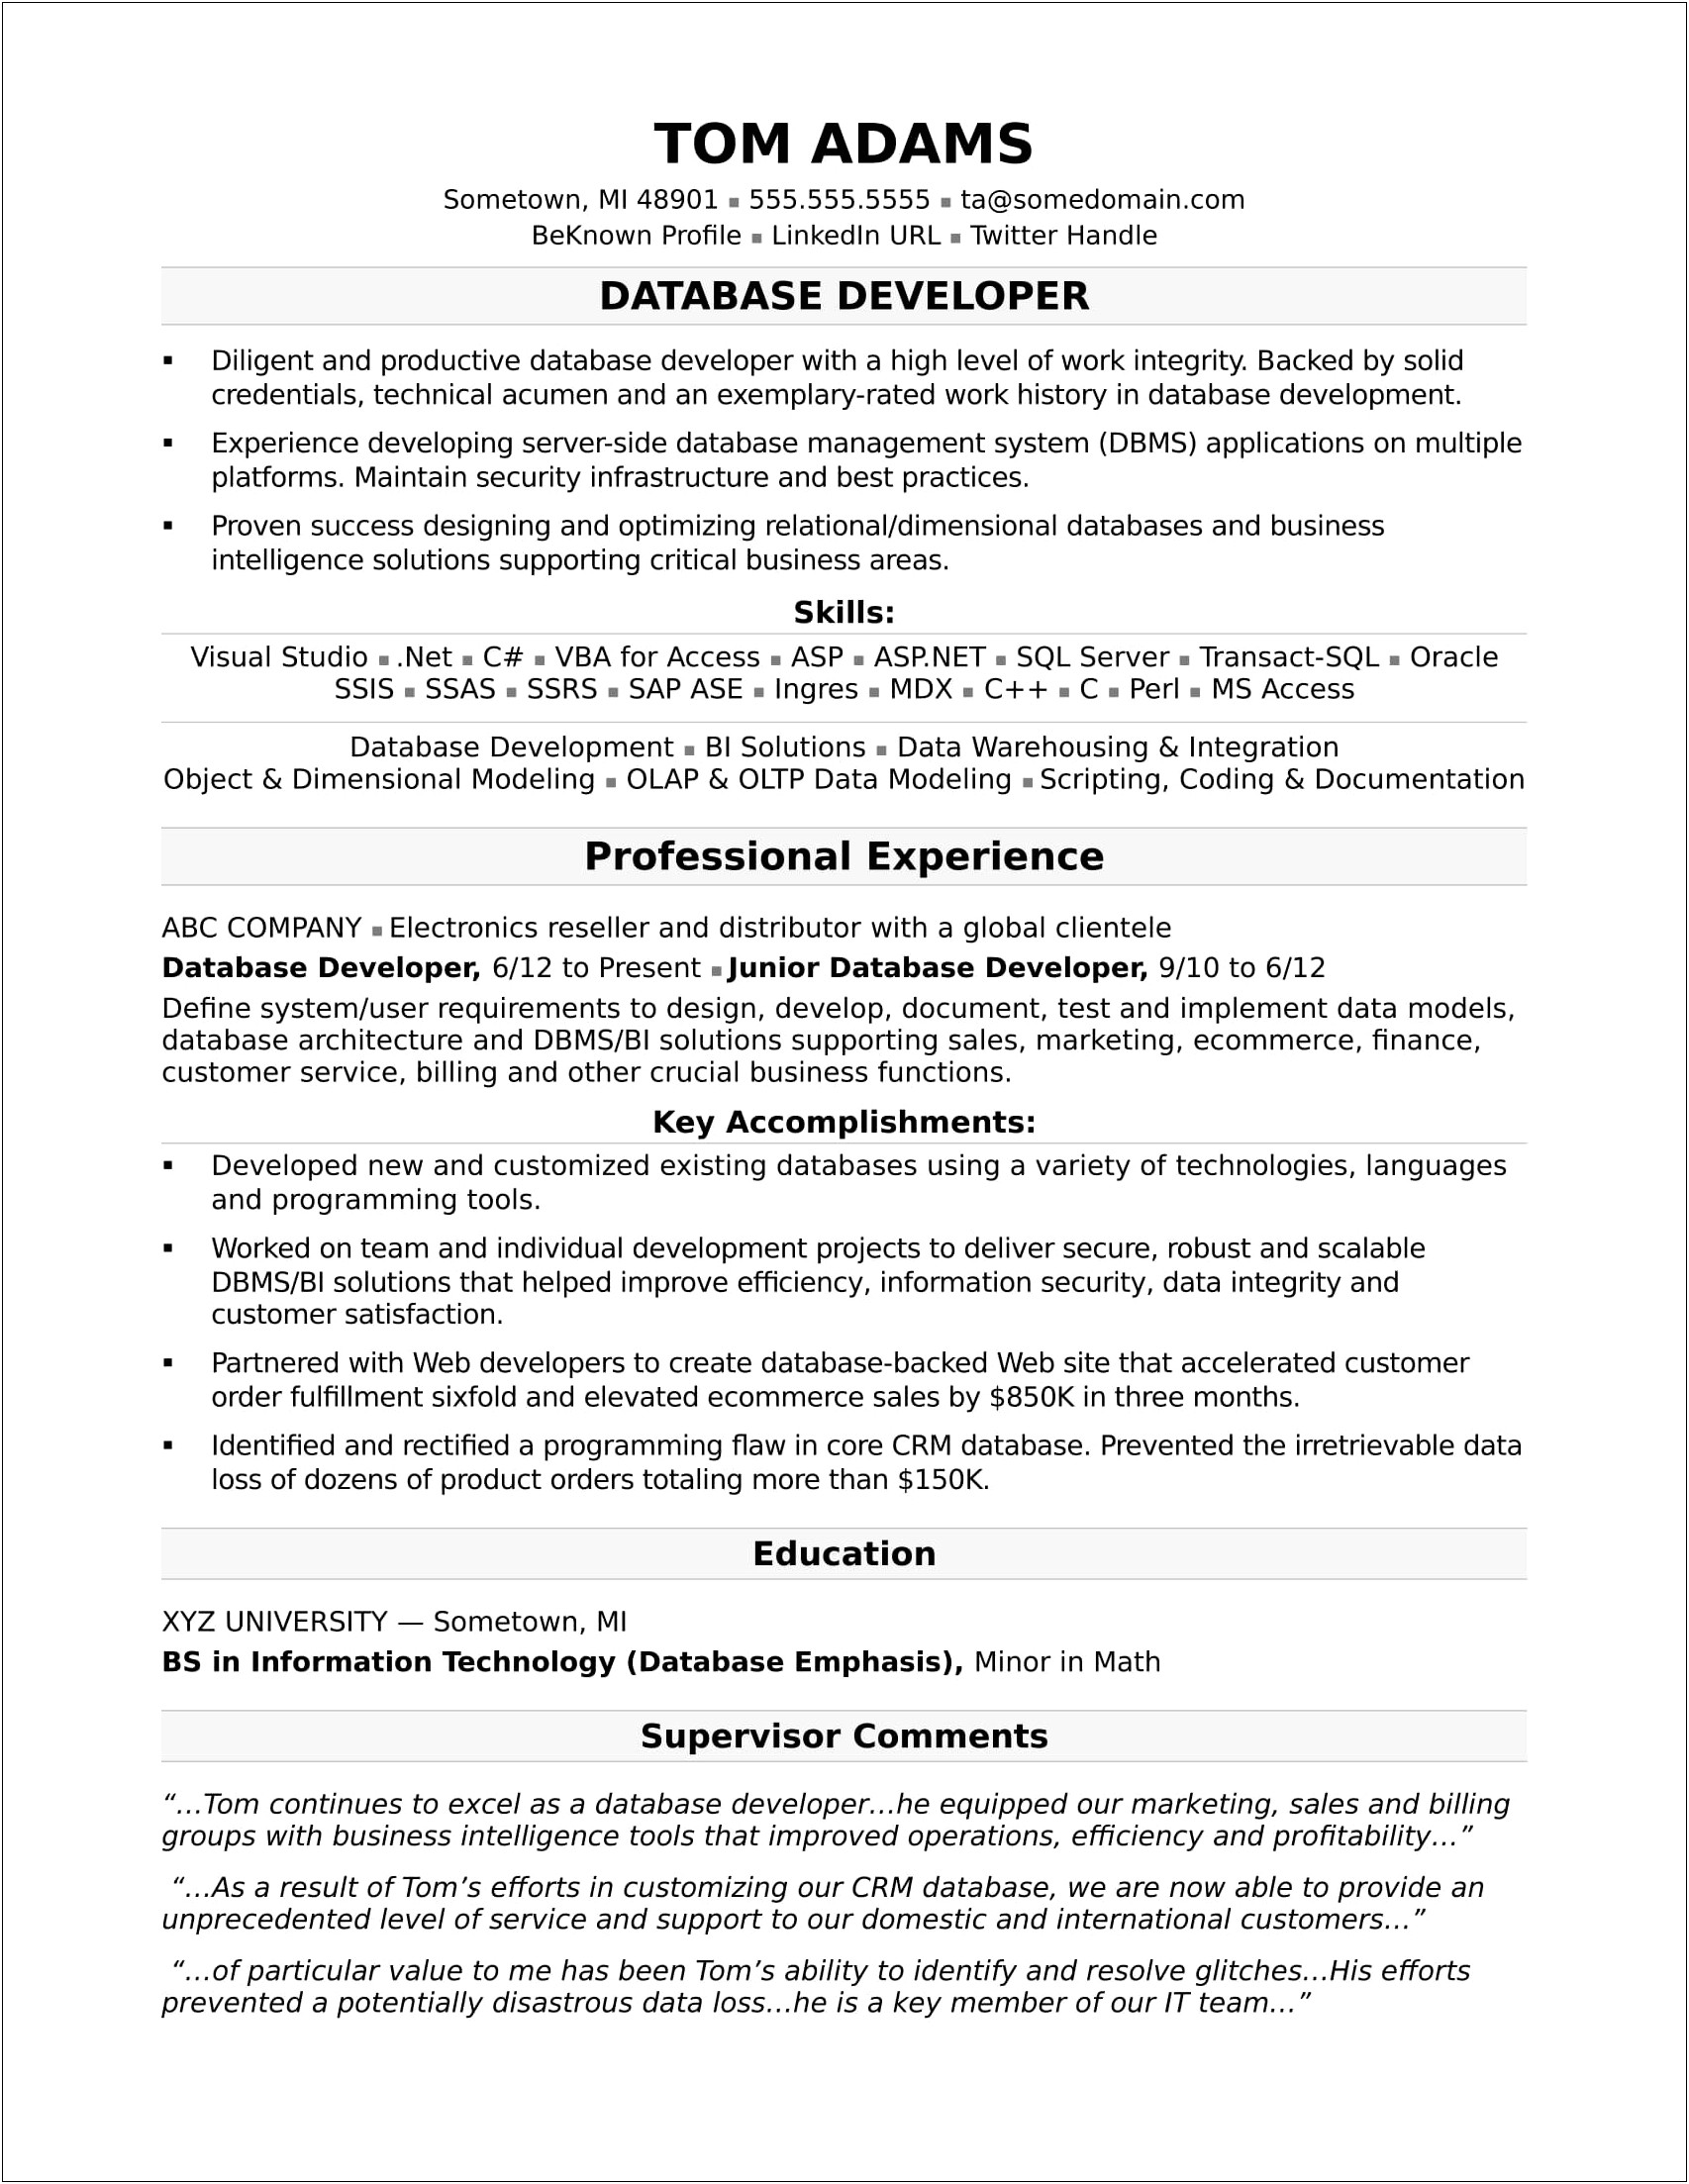 Resume Wording For Working With Databases